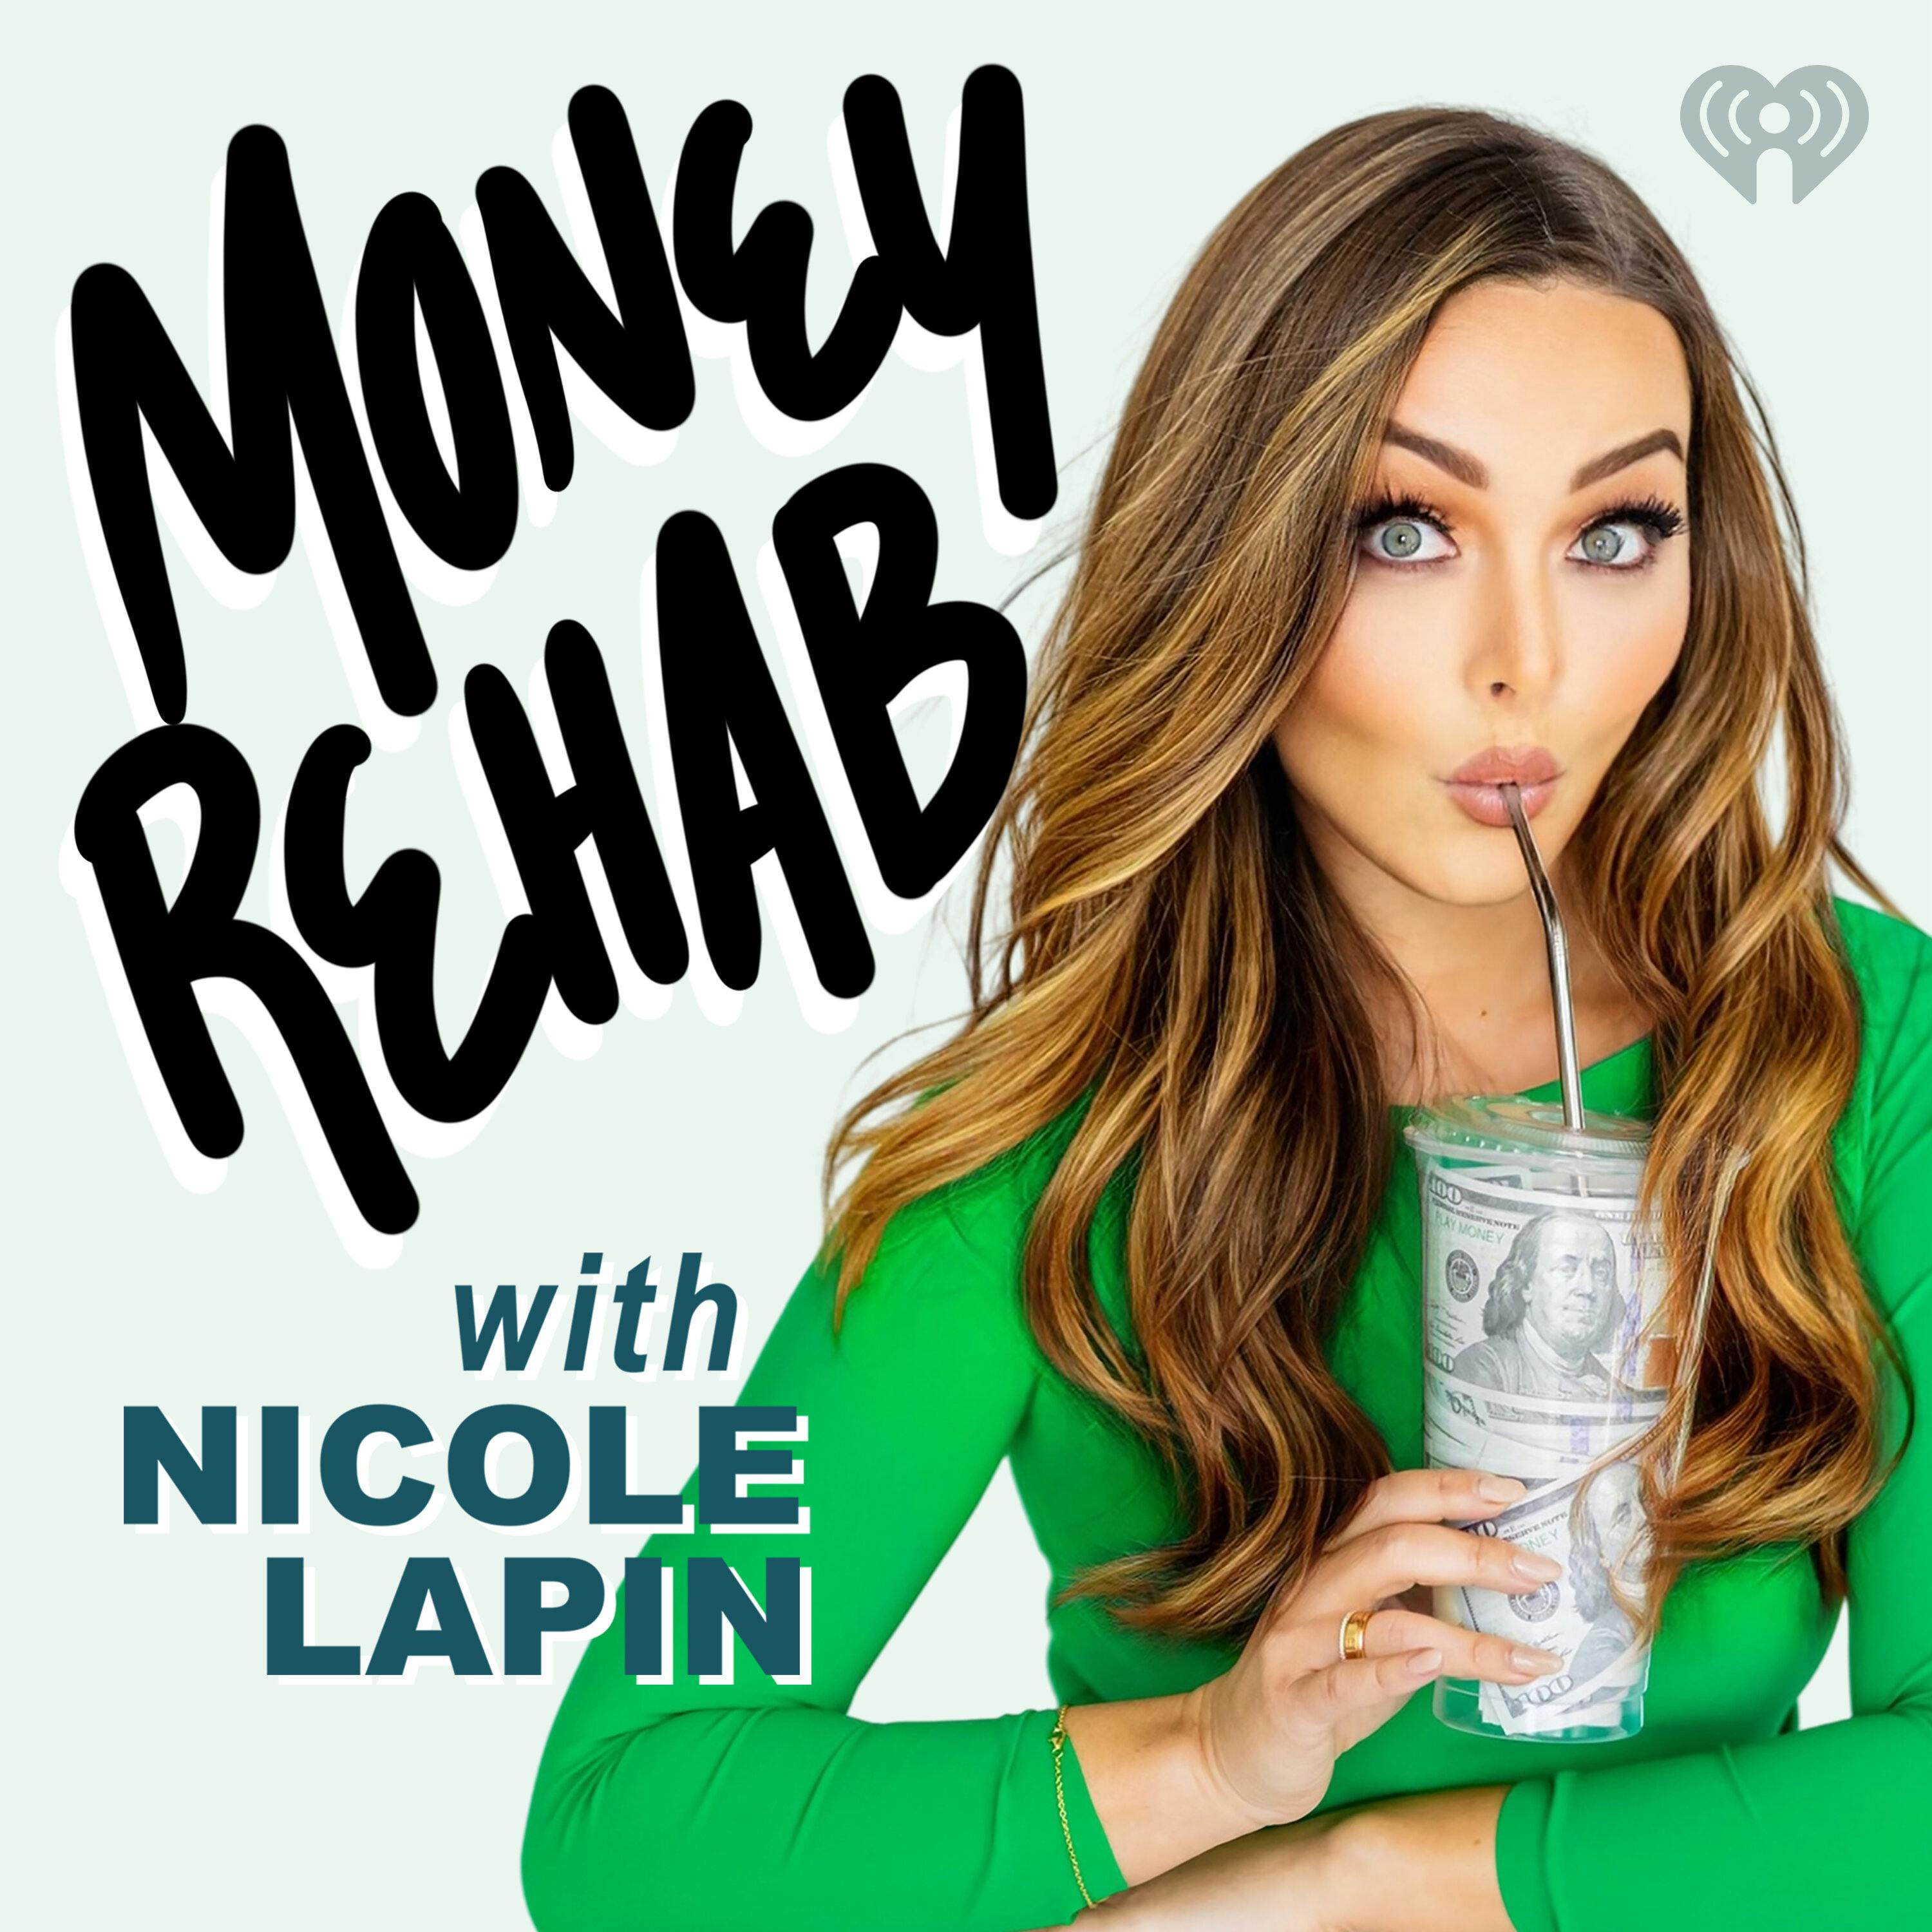 Encore: "I want to spend 10k on tattoos… how much can I afford?" (Listener Intervention)